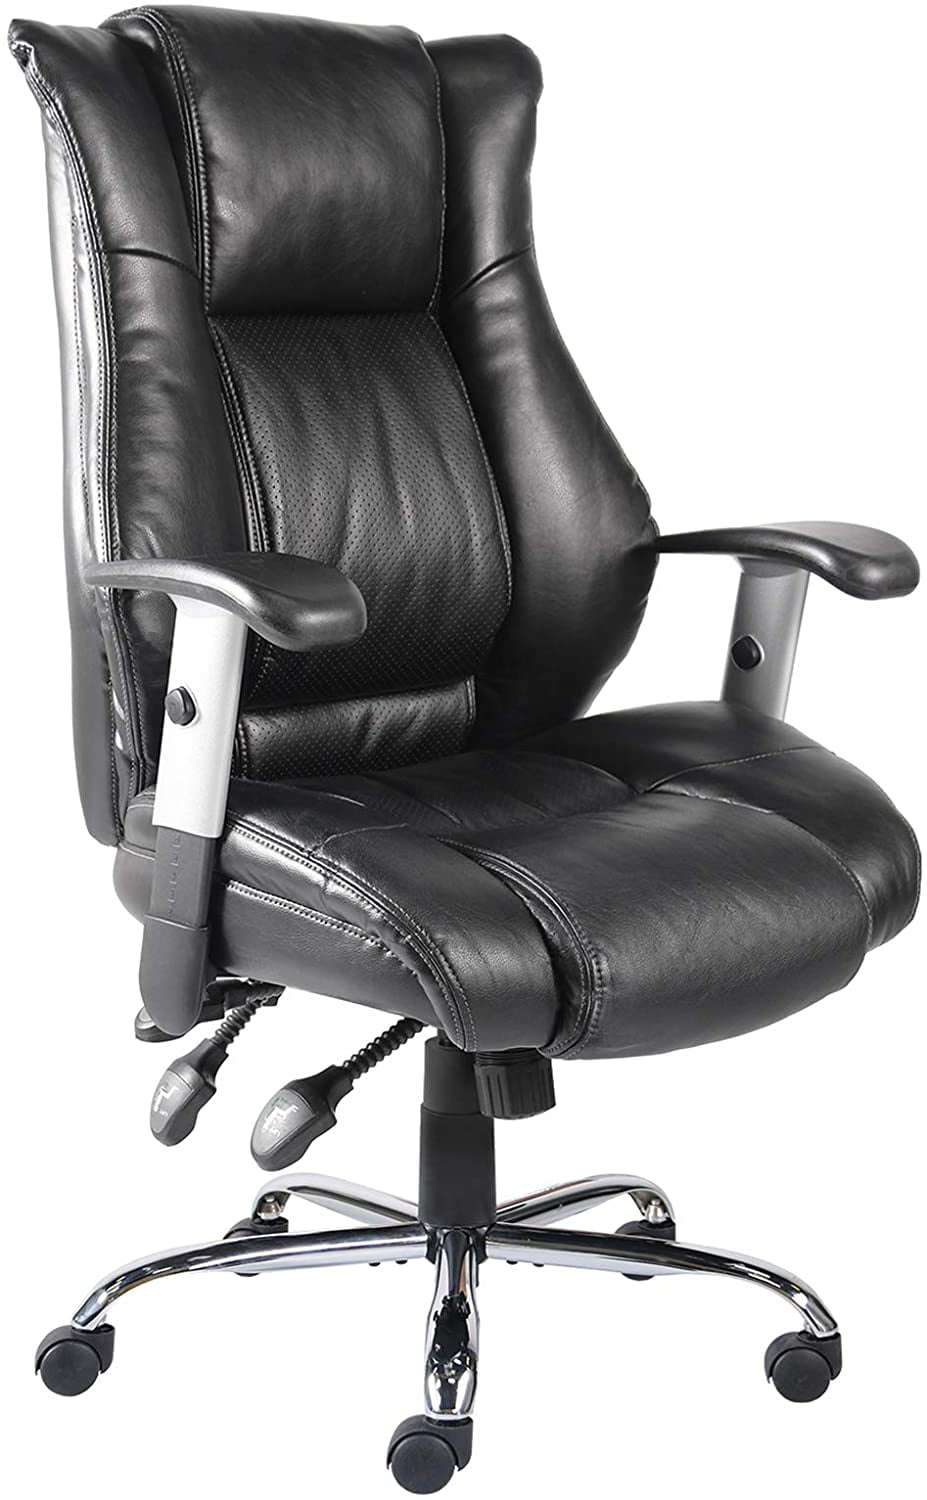 Computer Chair Desk Chair SUJING Office Chair Desk Ergonomic Swivel Executive Adjustable Task Computer High Back Chair with Back Support in Home